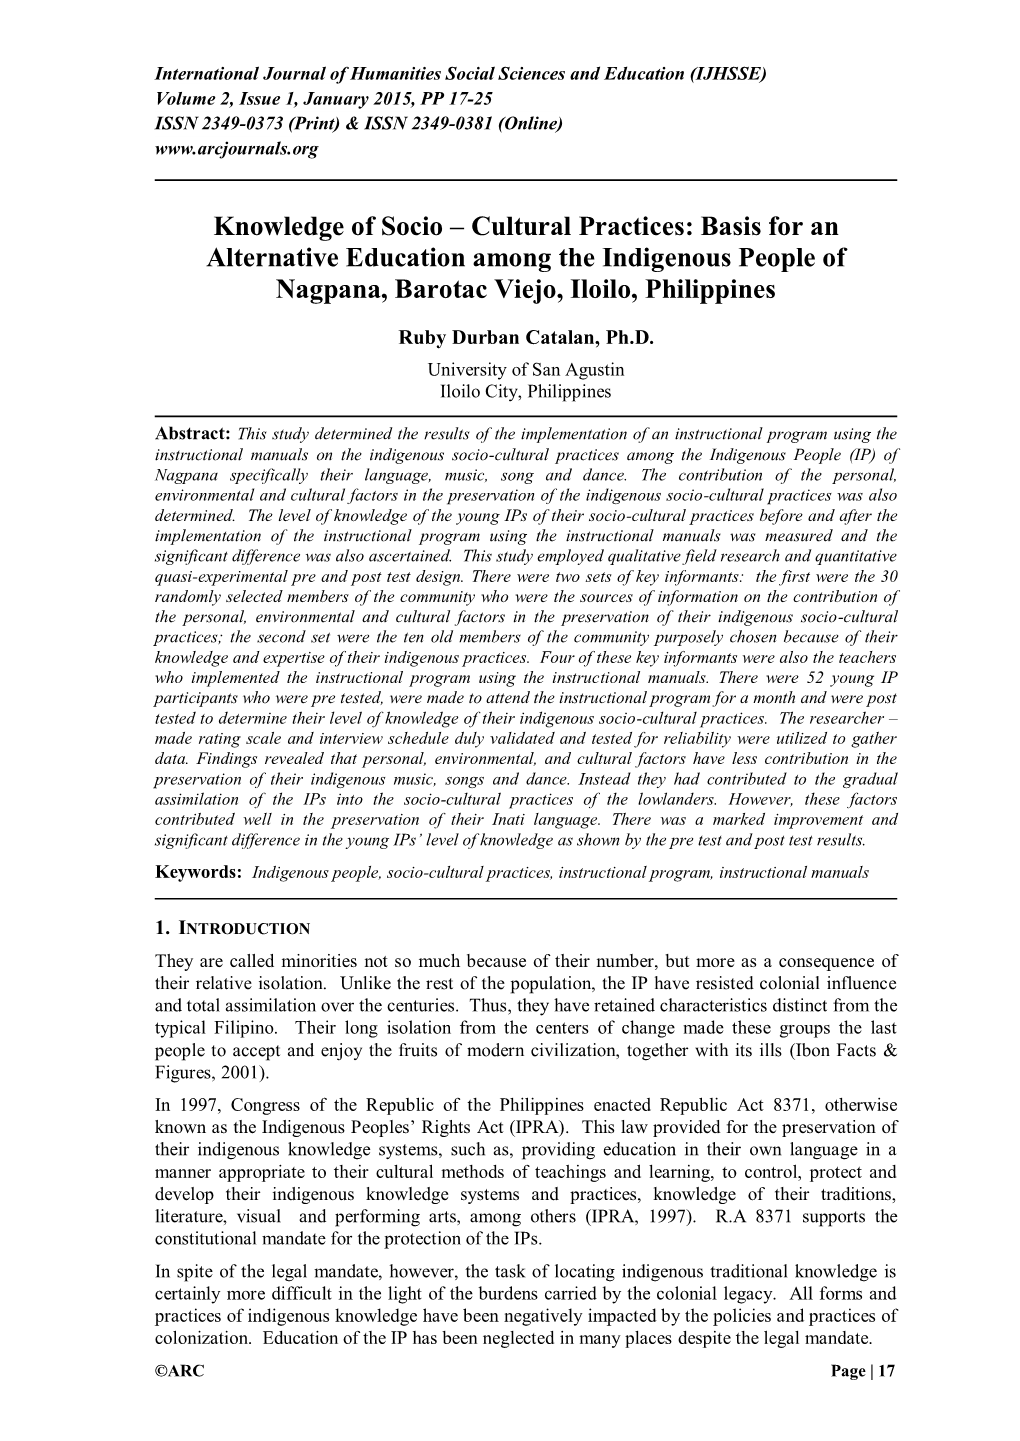 Knowledge of Socio – Cultural Practices: Basis for an Alternative Education Among the Indigenous People of Nagpana, Barotac Viejo, Iloilo, Philippines